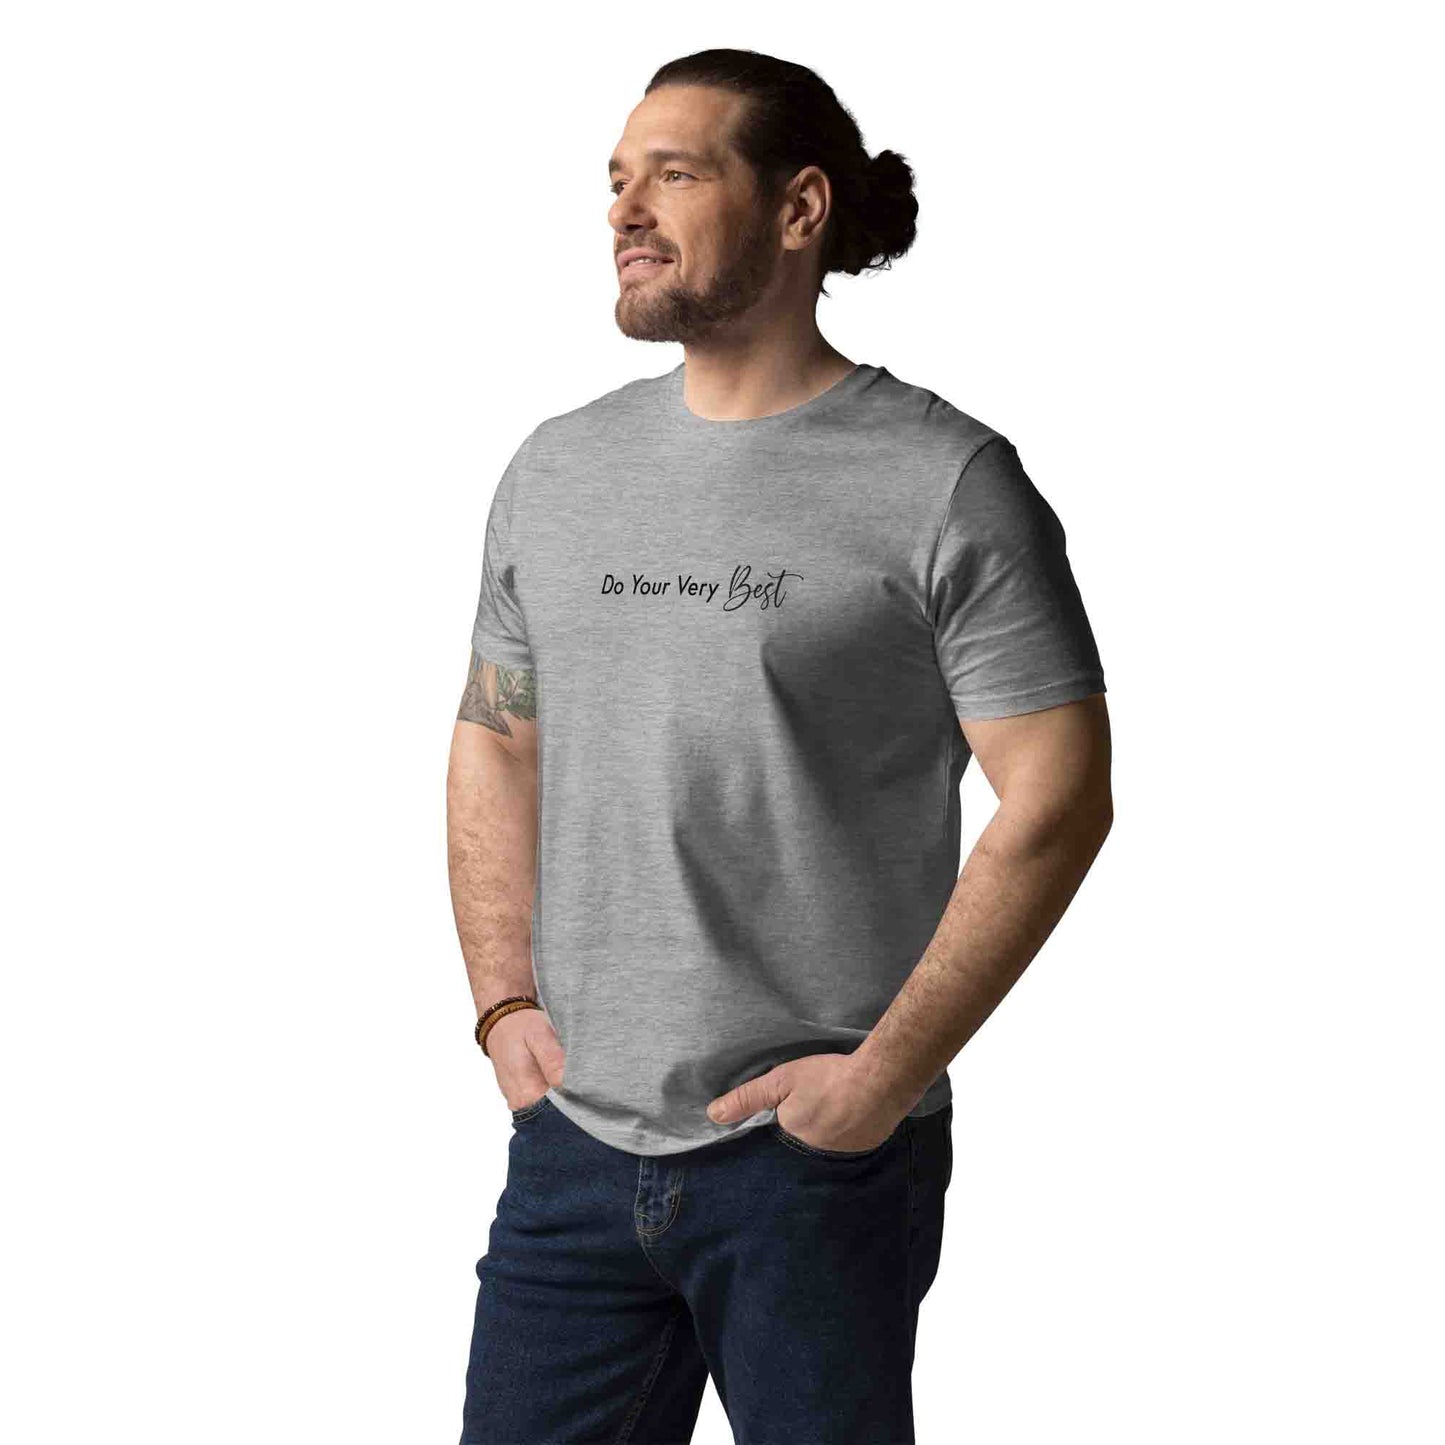 Men light gray 100% organic cotton t-shirt with motivational quote, "Do Your Very Best."